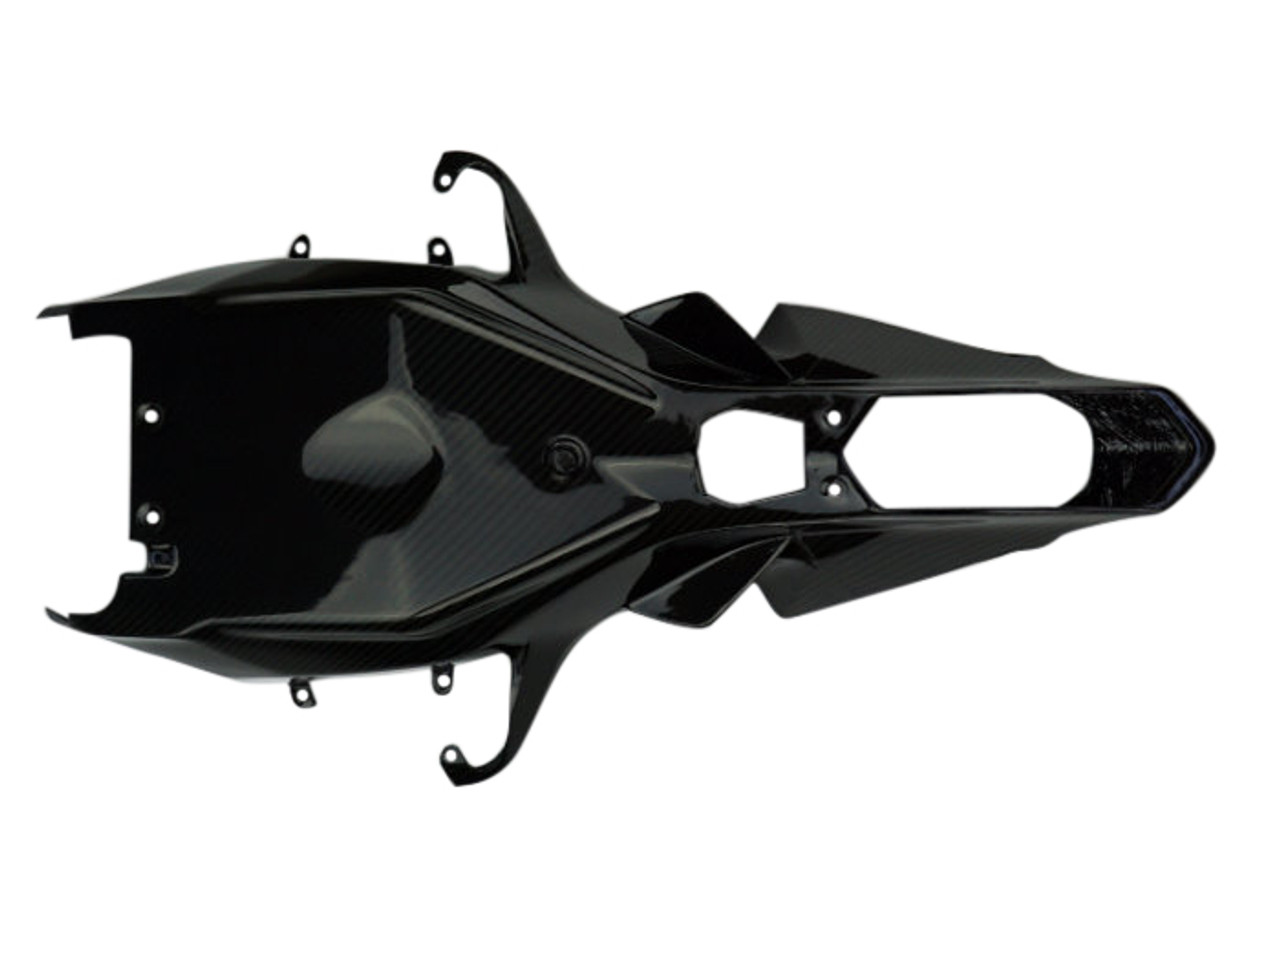 Undertray in Glossy Twill Weave Carbon Fiber for Yamaha R1 2015+